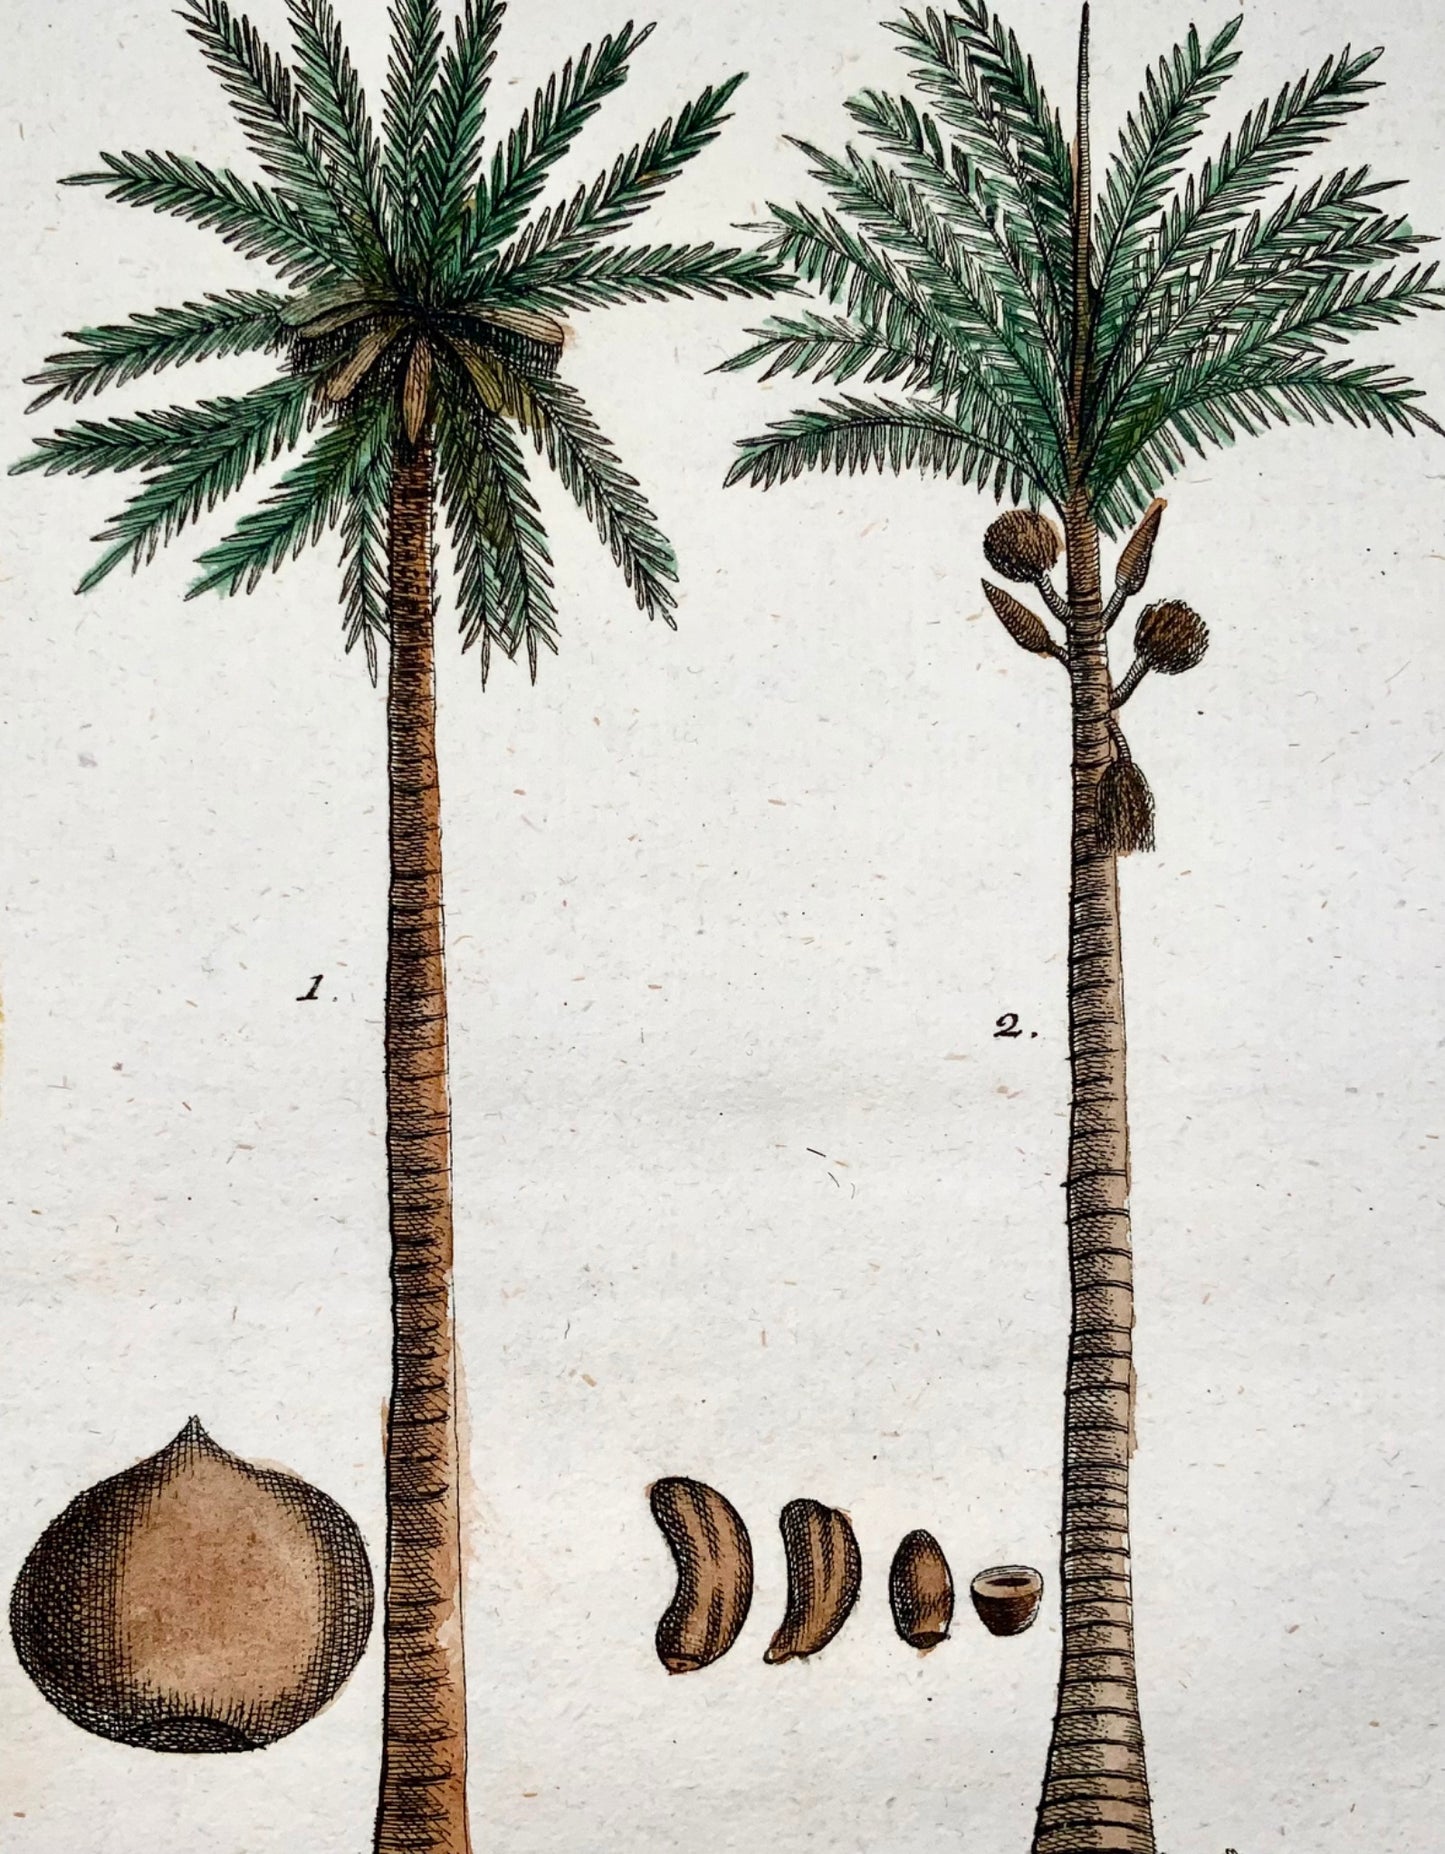 1790 PALM TREES COCONUTS Botany - Joh. Sollerer - hand coloured engraving